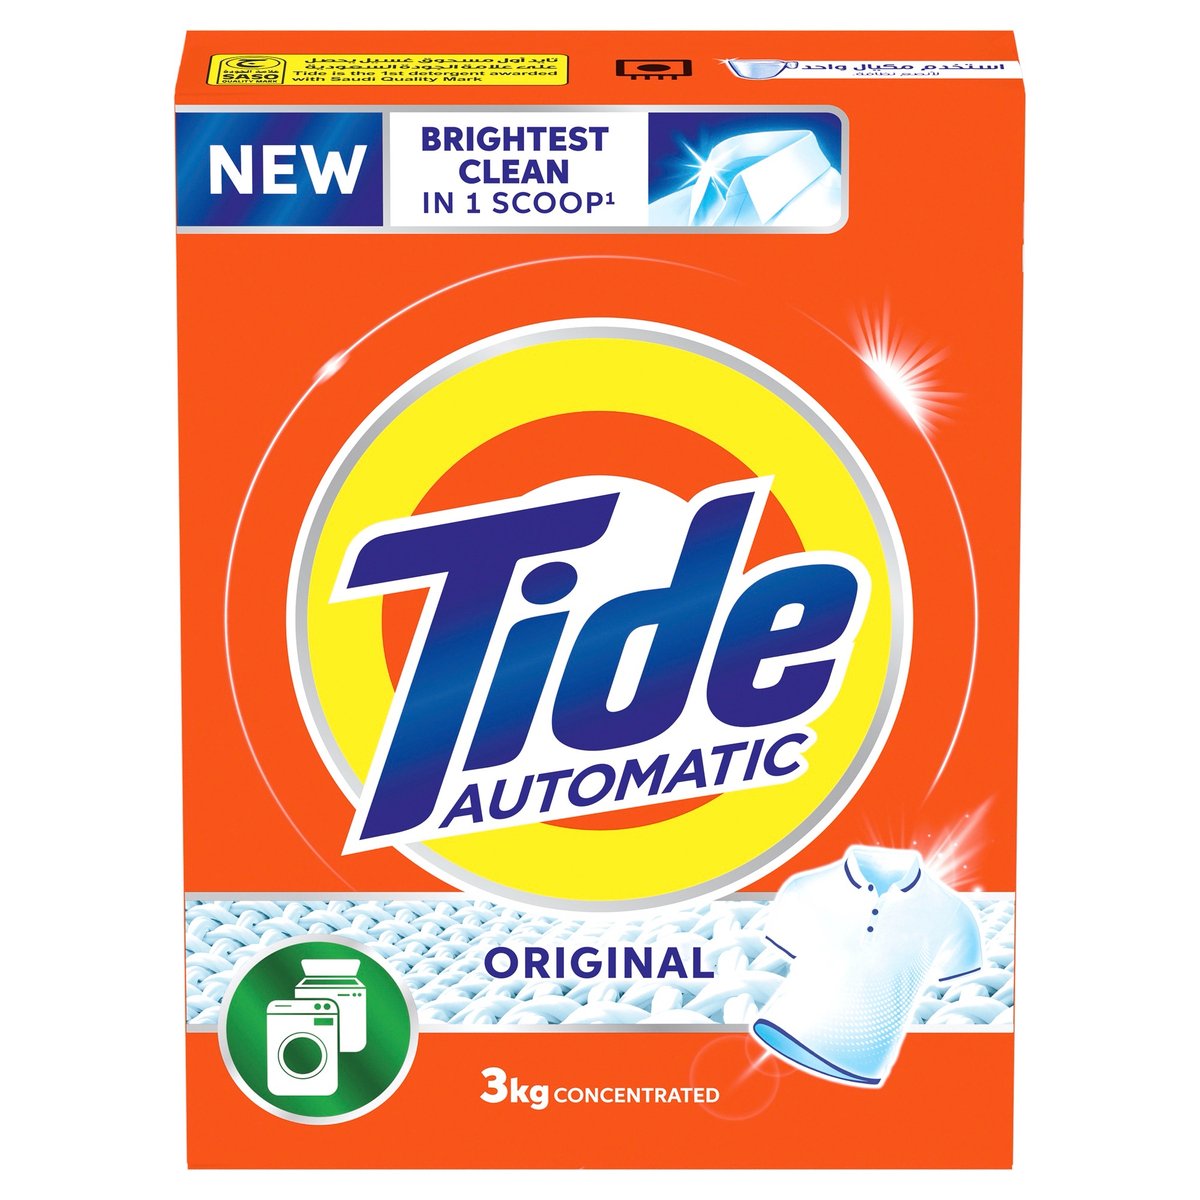 Buy Tide Automatic Powder Laundry Detergent Original Scent 3kg Online at Best Price | Front load washing powders | Lulu Kuwait in UAE